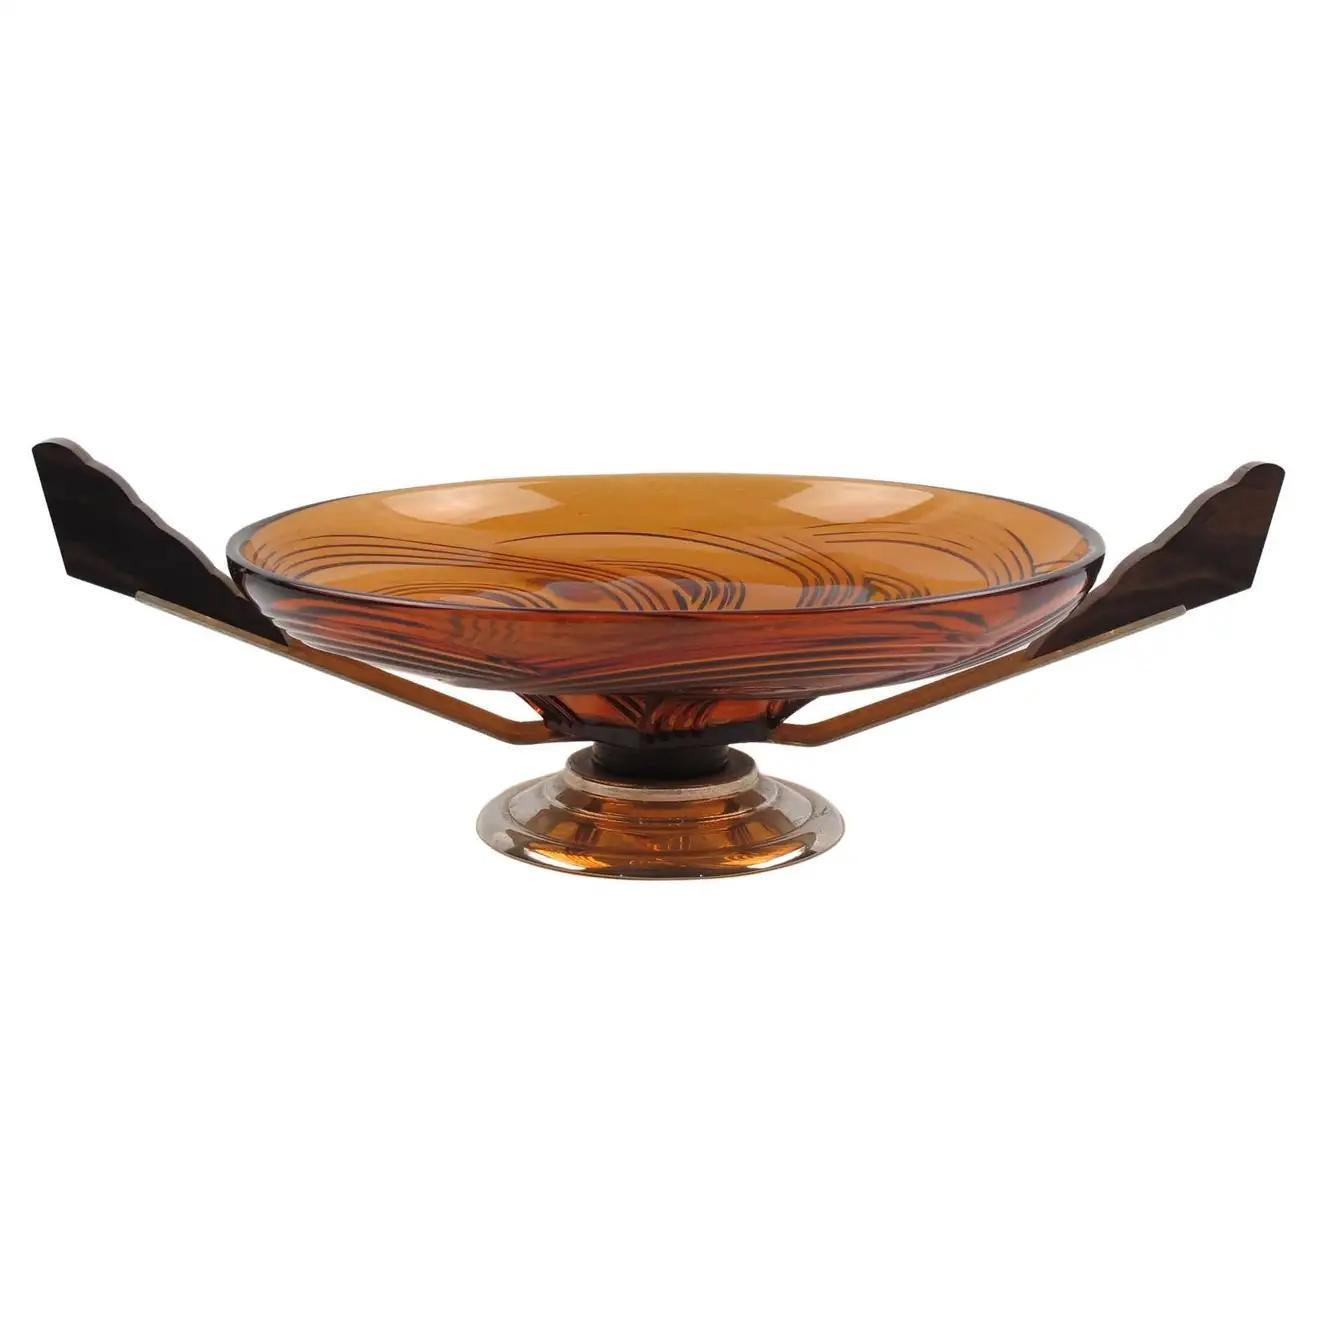 Art Deco Macassar Wood and Glass Centerpiece Bowl, France 1930s For Sale 1